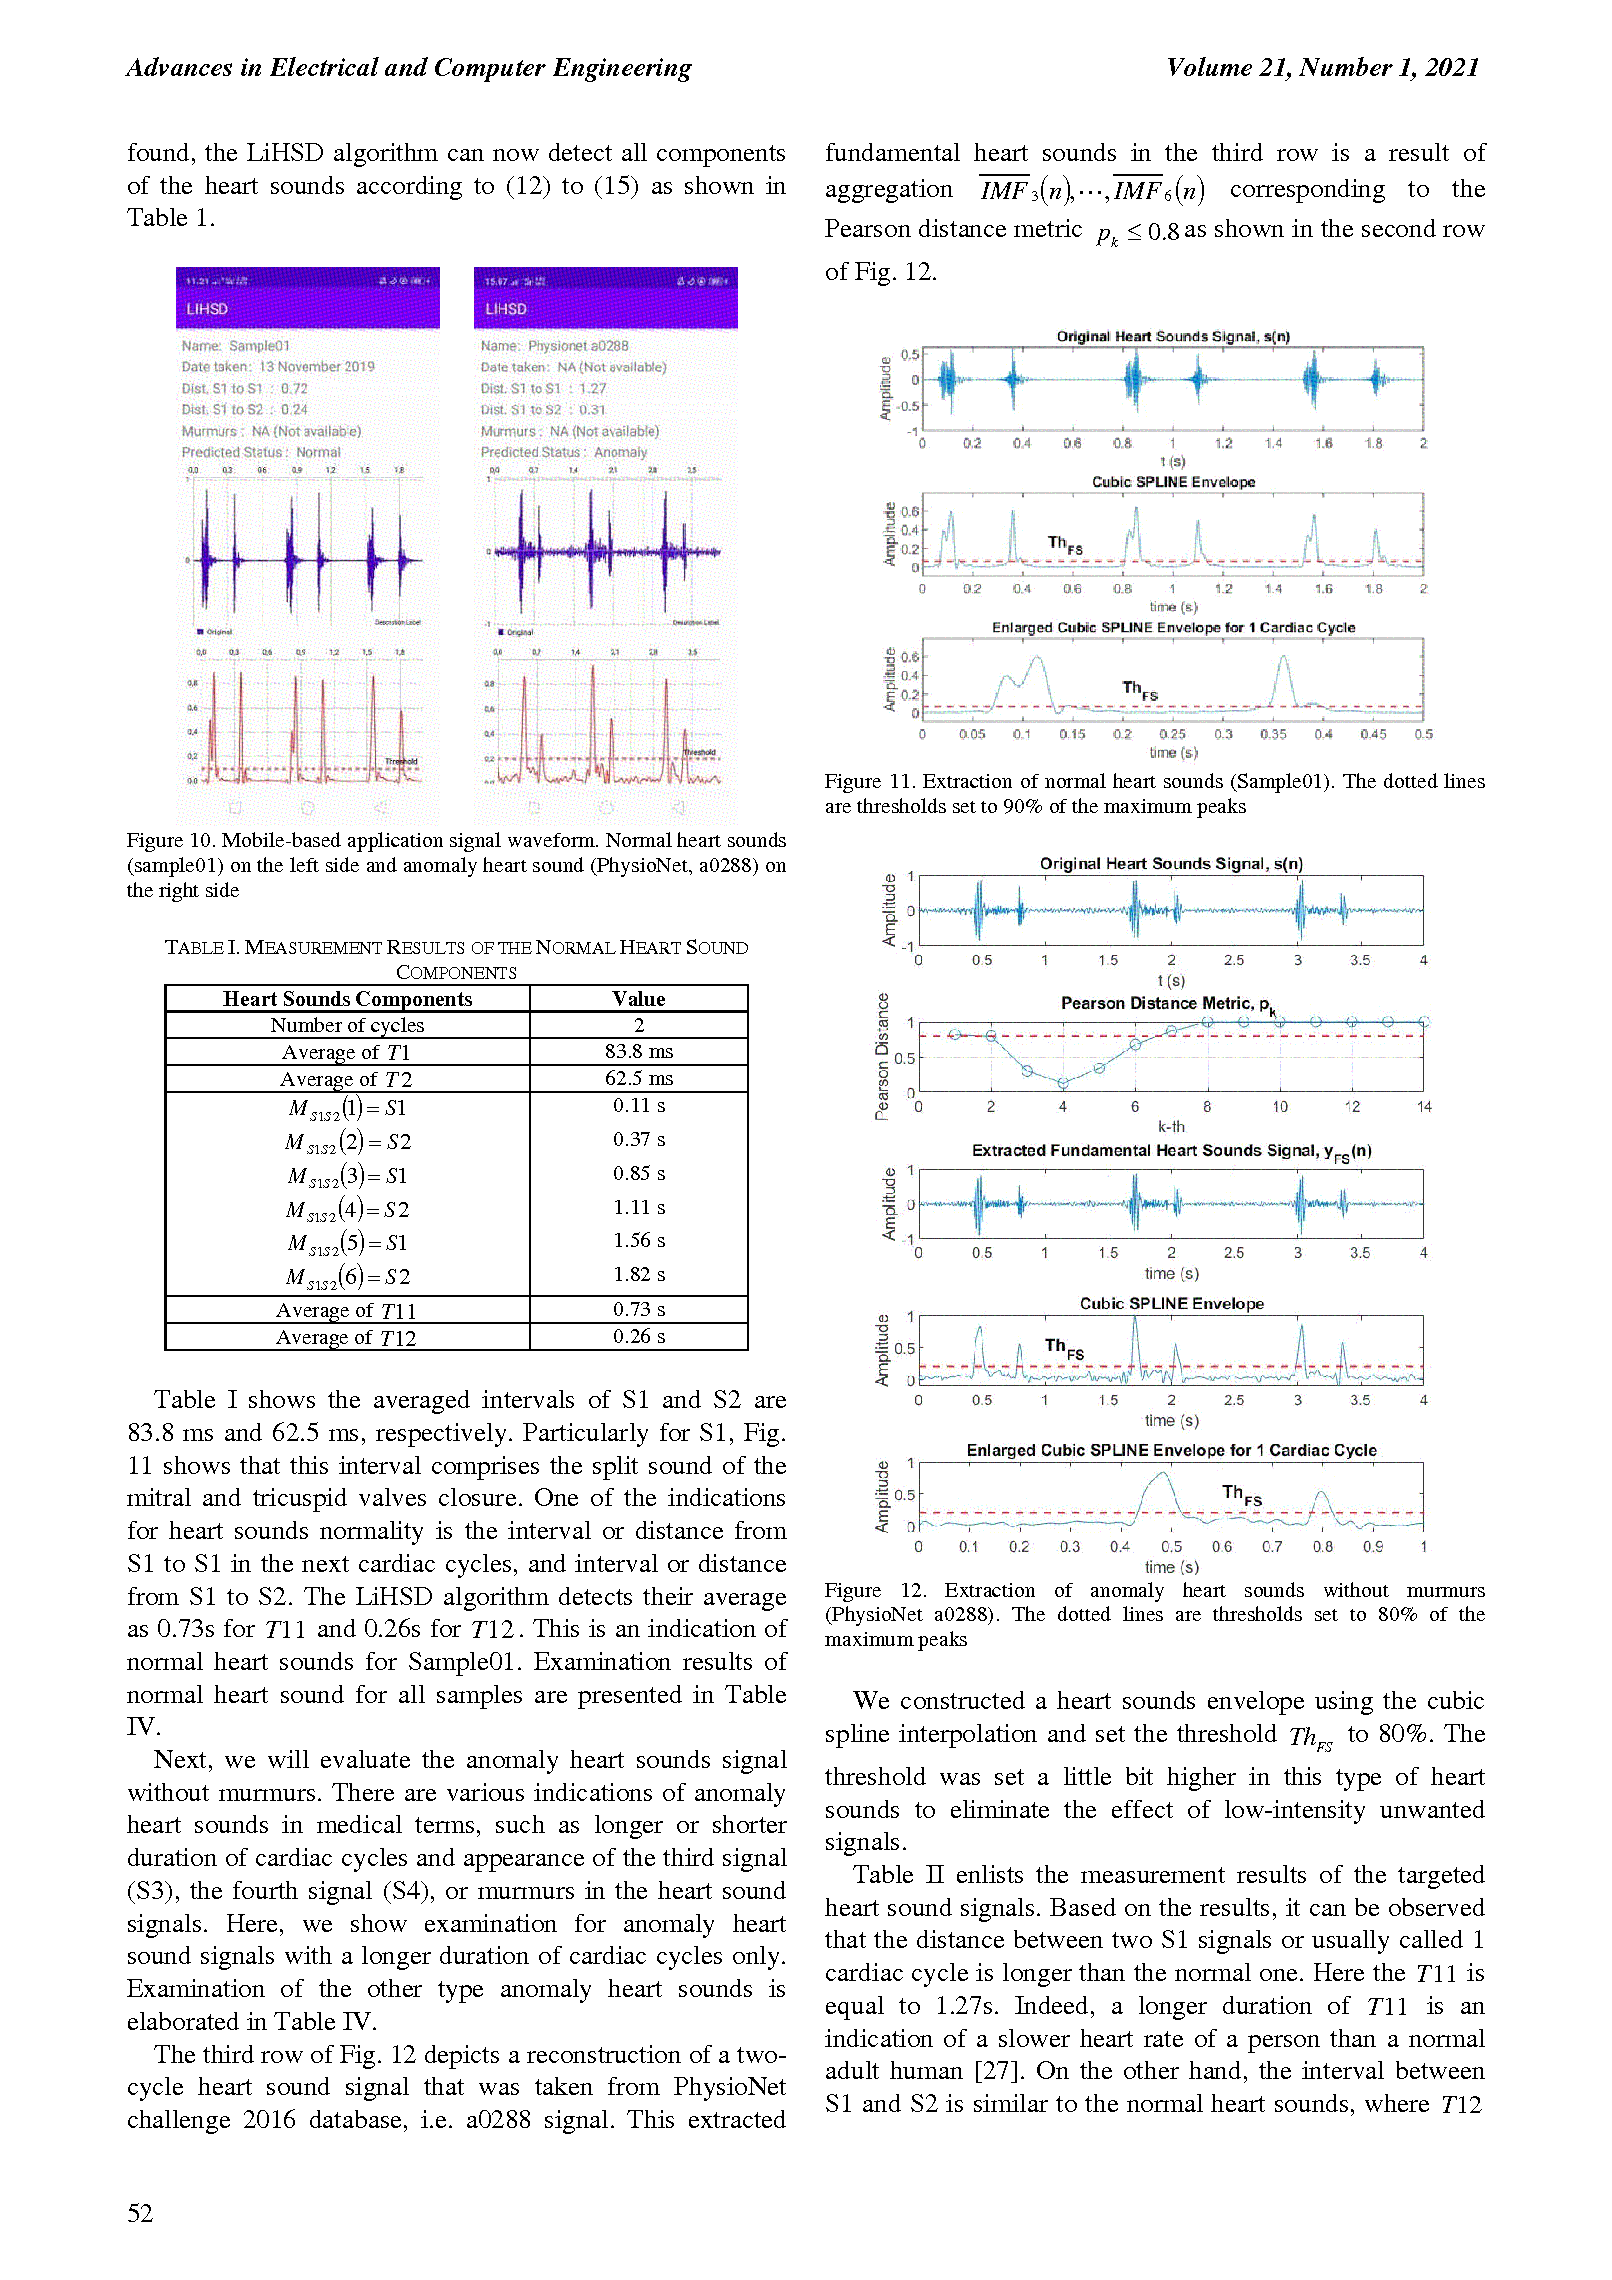 PDF Quickview for paper with DOI:10.4316/AECE.2021.01005